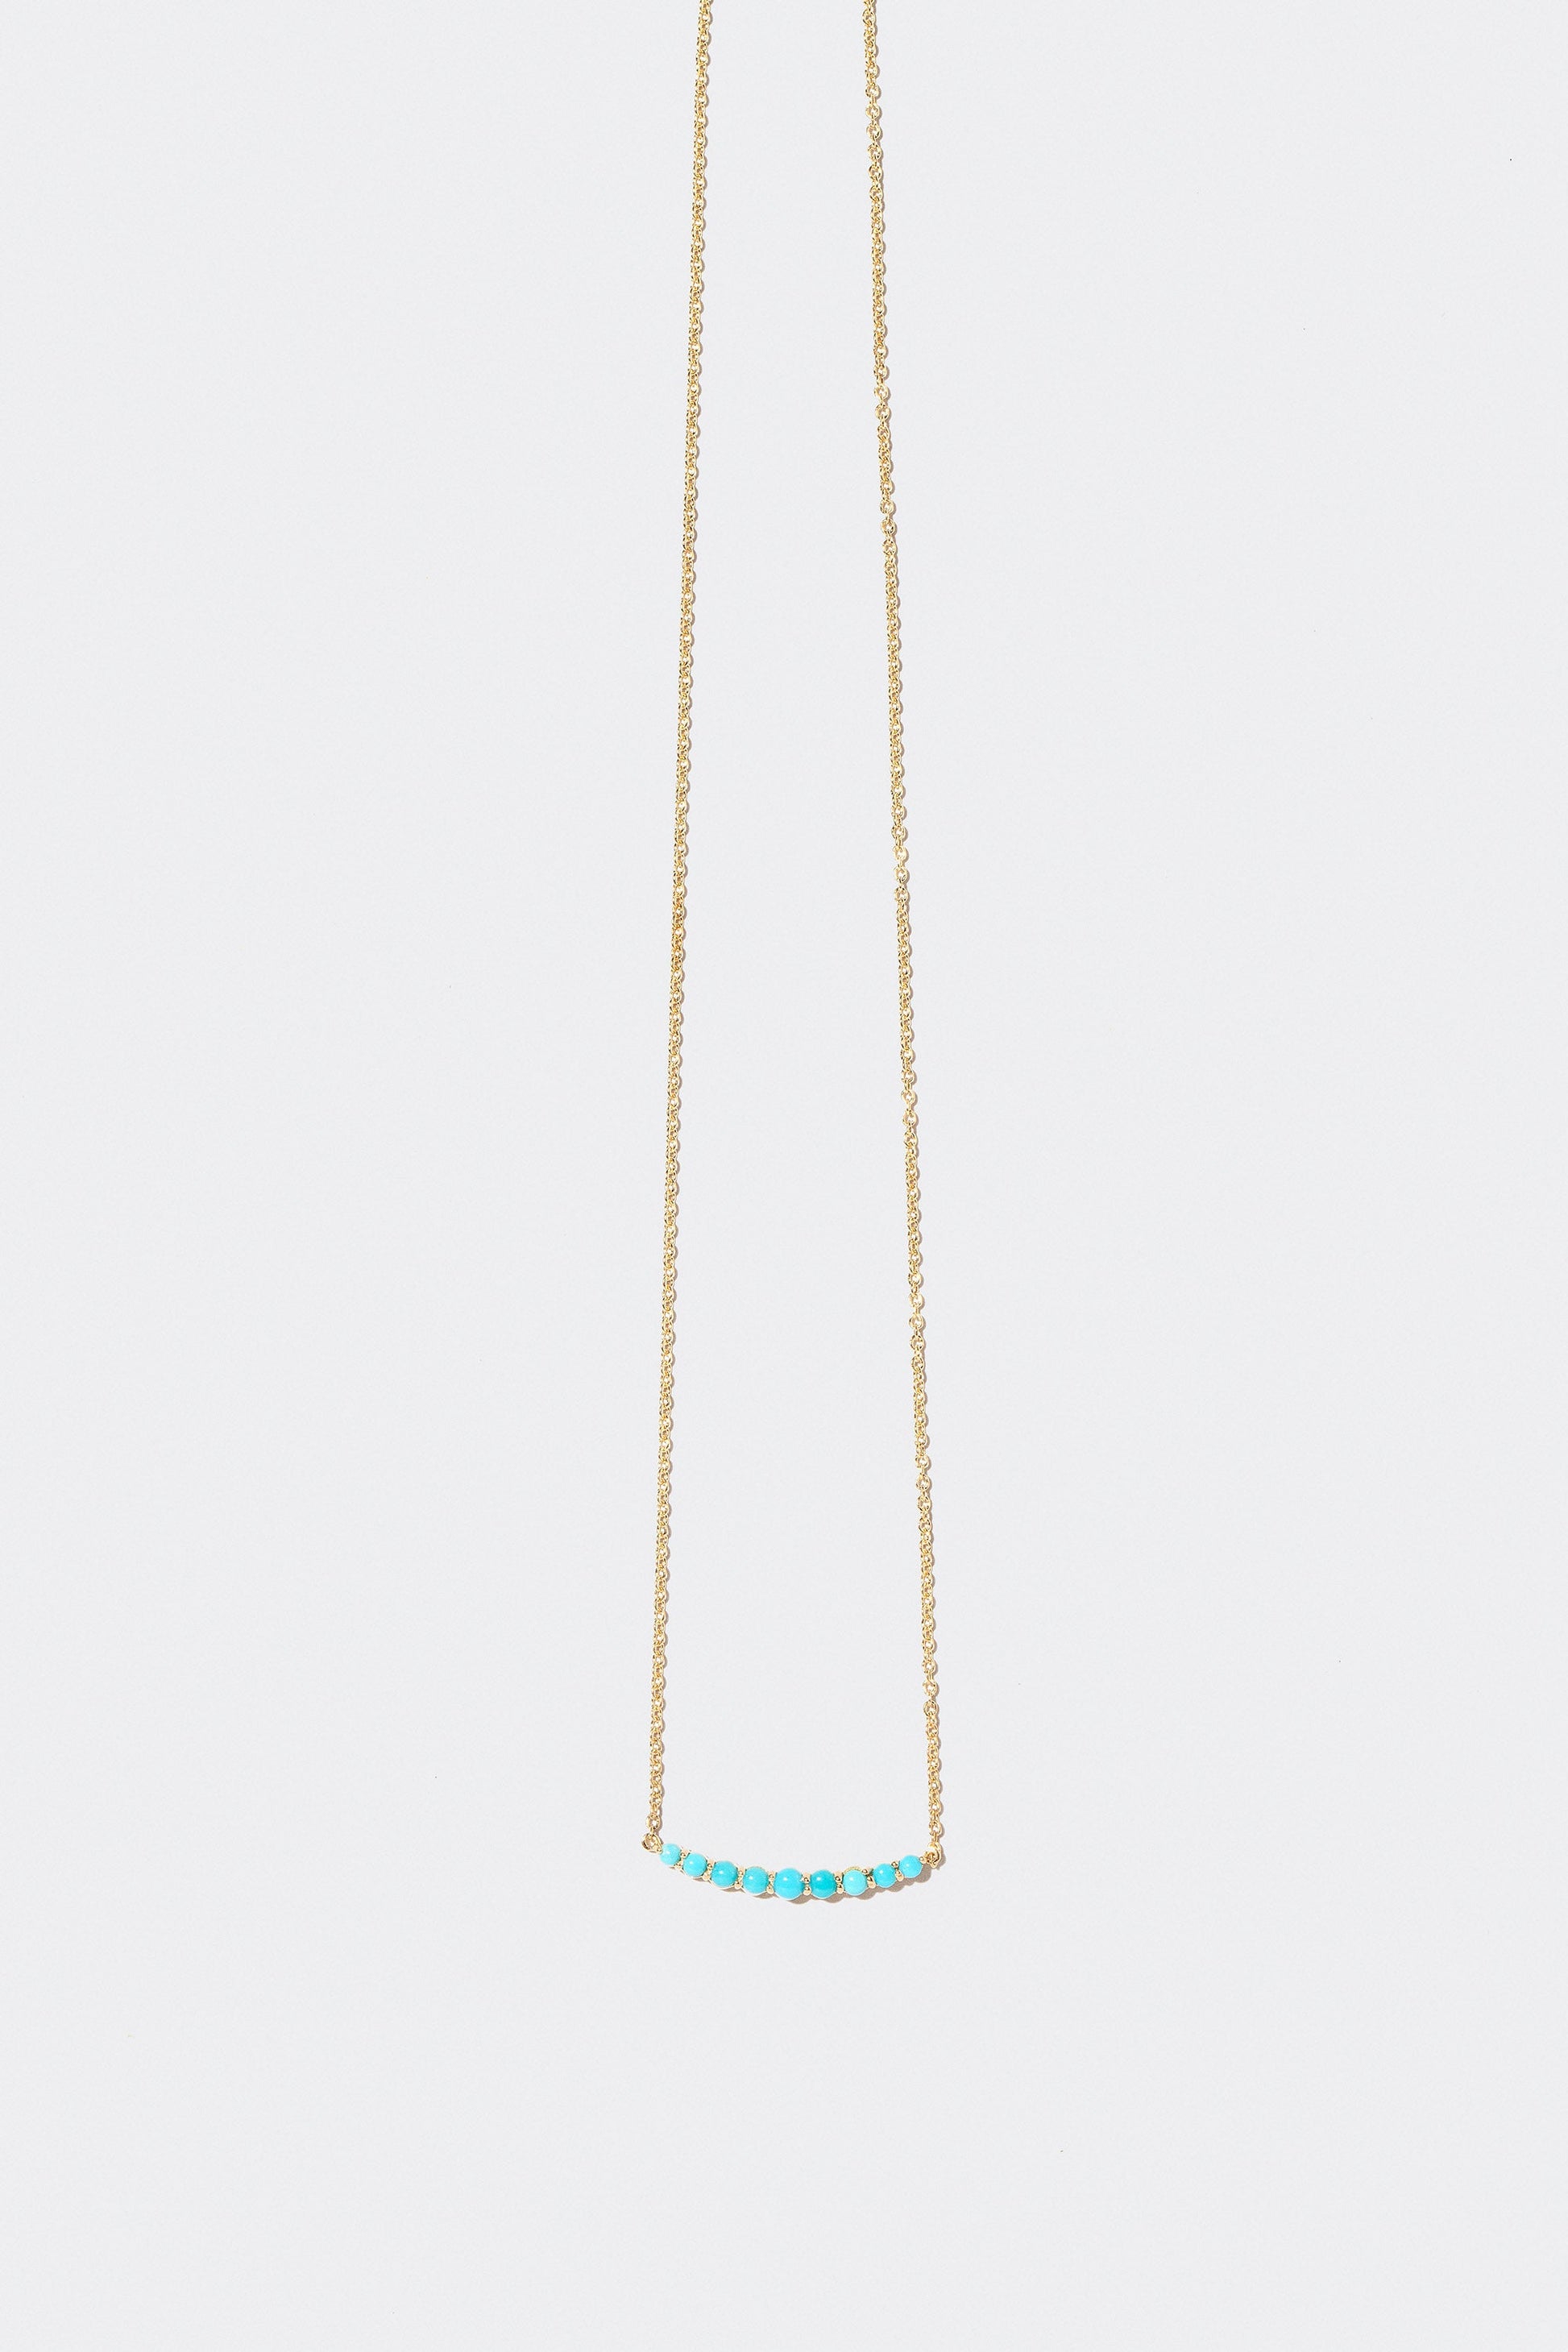 Turquoise Crescent Necklace on light color background.